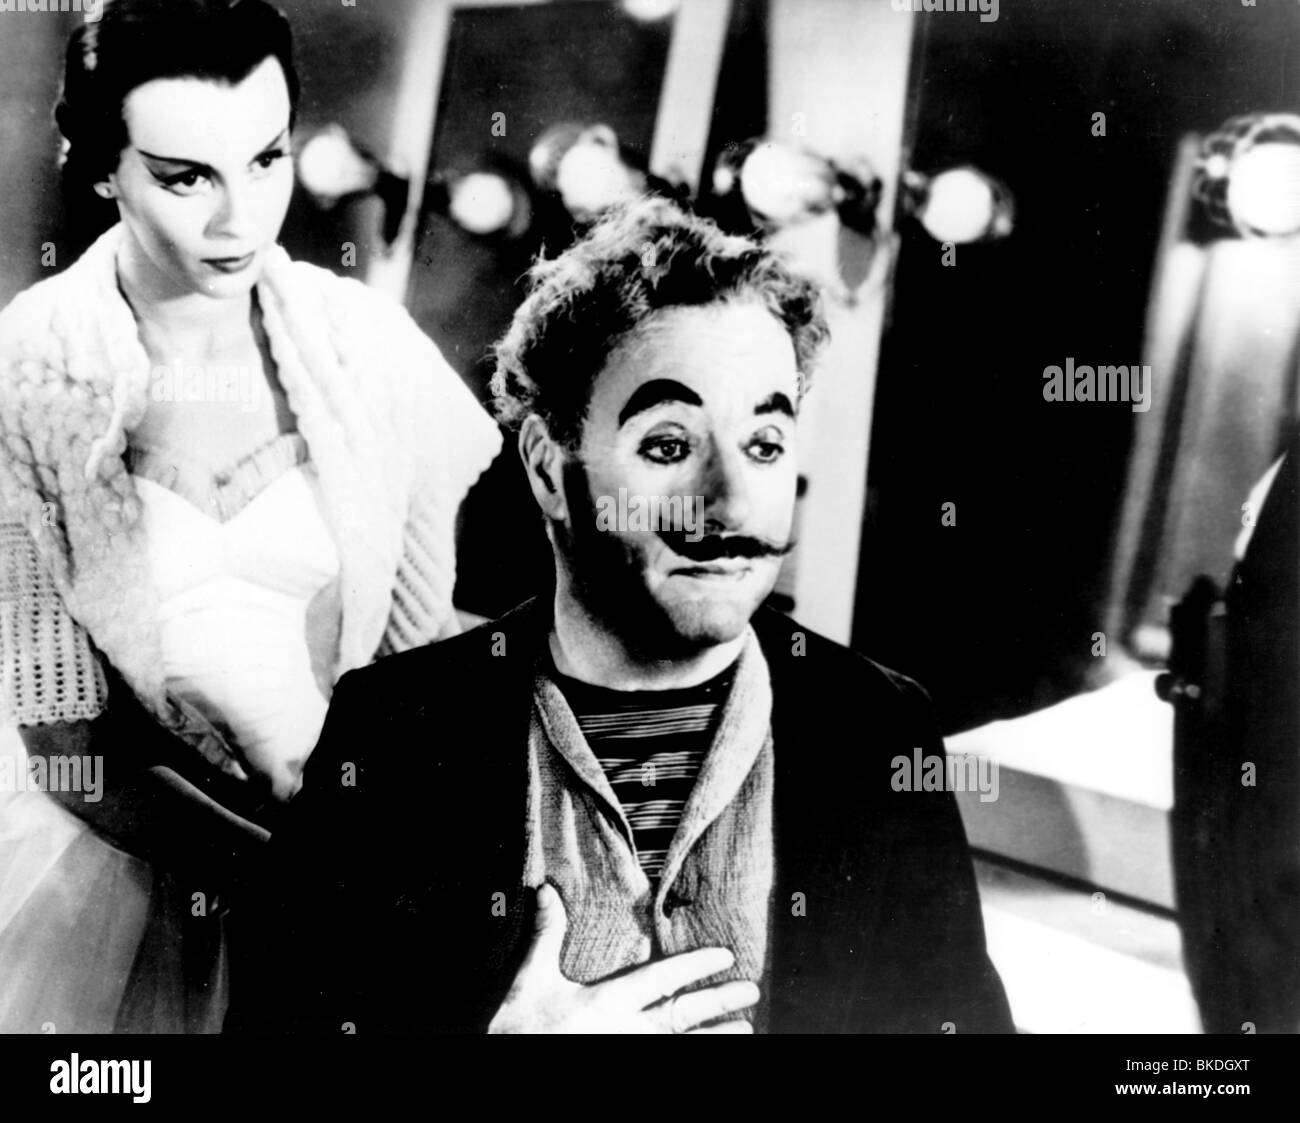 LIMELIGHT (1952) CLAIRE BLOOM, CHARLIE CHAPLIN LMLG 007P Stock Photo